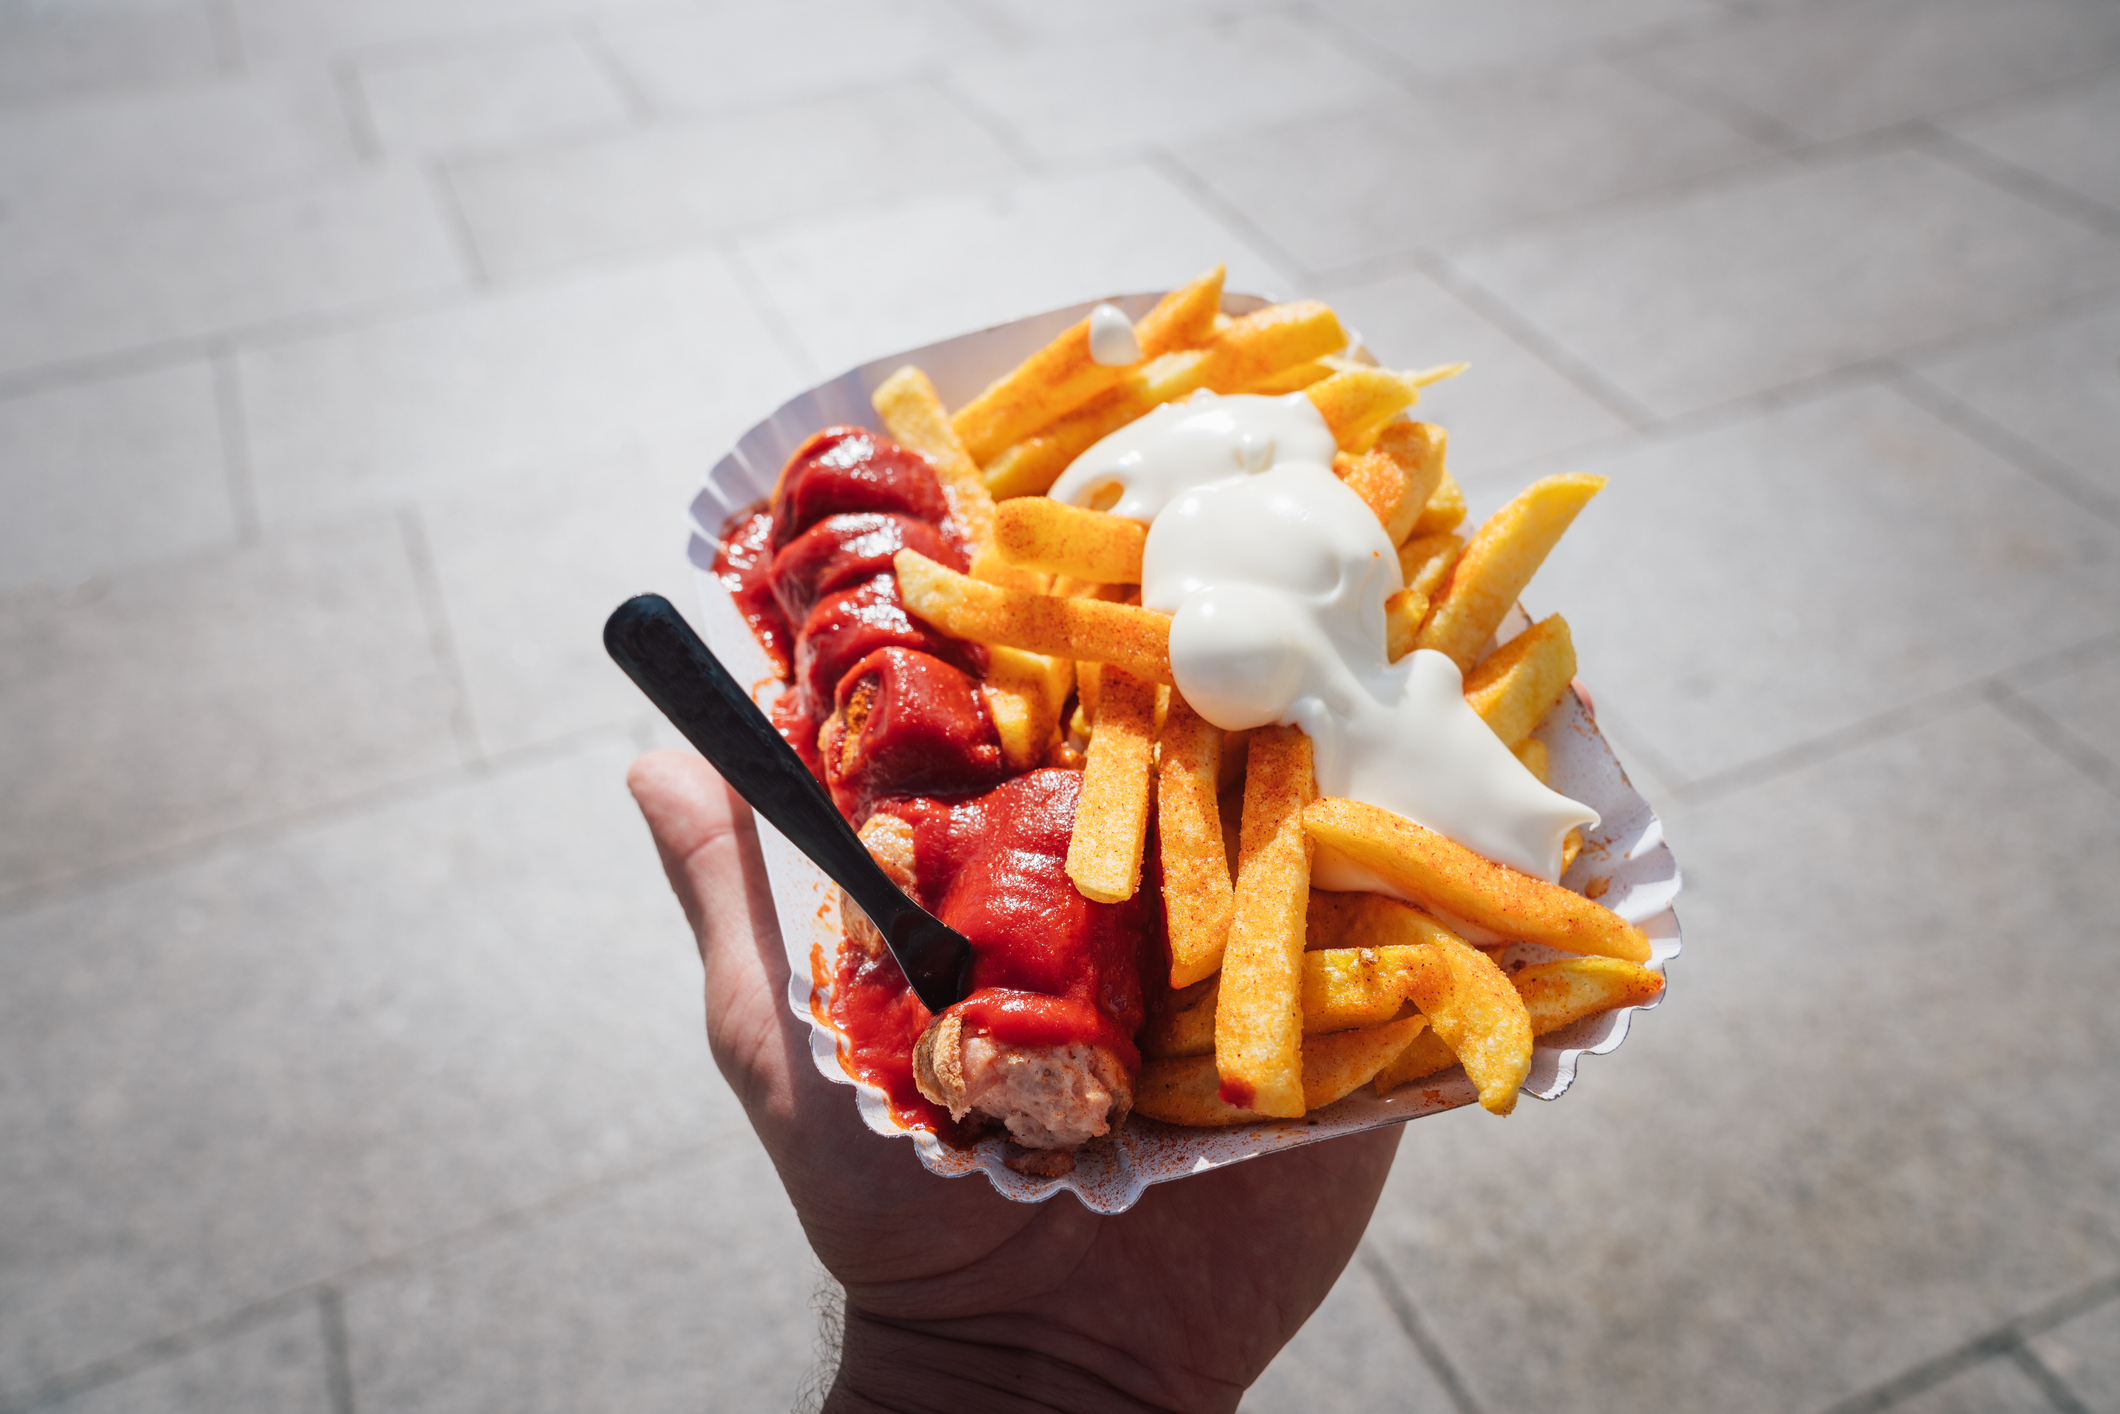 Hand holding a plate of fries with ketchup and mayonnaise, outdoors